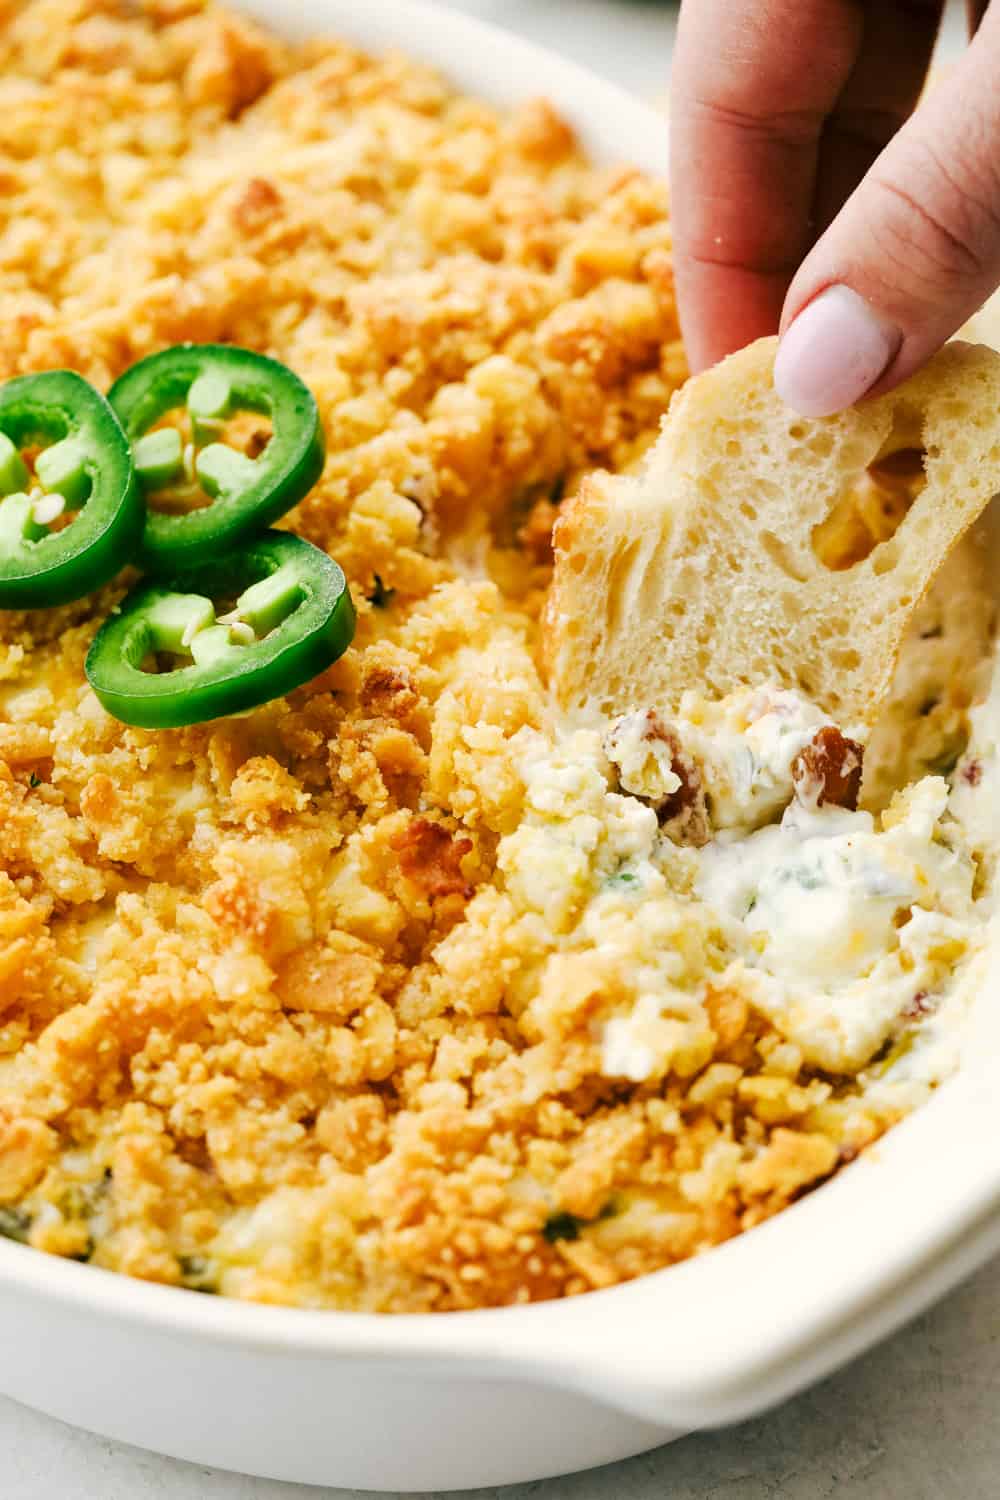 Dipping bread into the creamy jalapeno dip. 